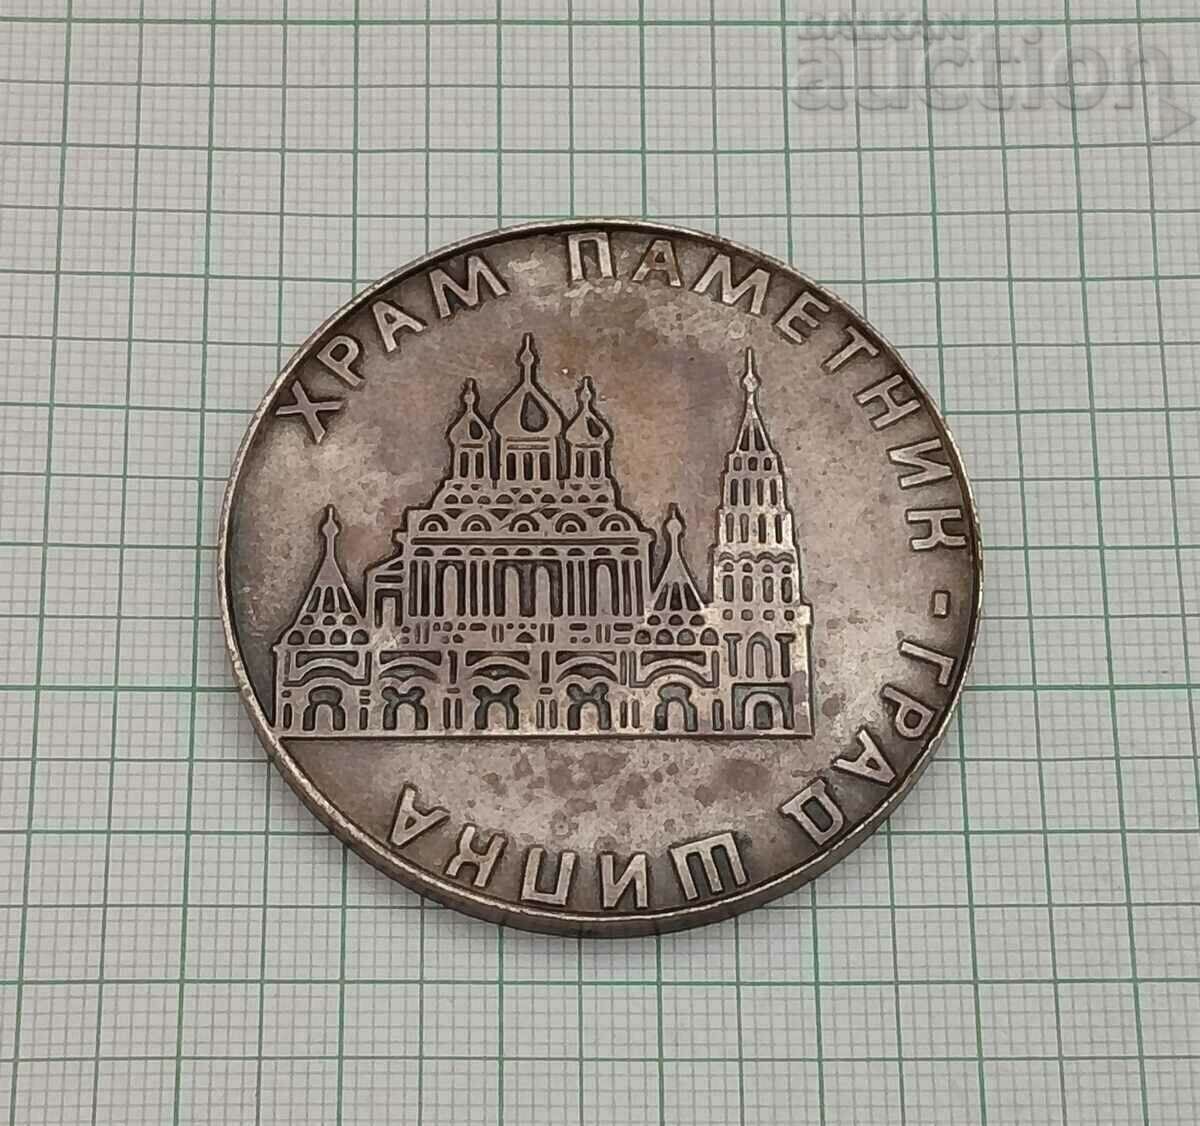 CITY OF SHIPKA TEMPLE-MONUMENT PLAQUET MEDAL